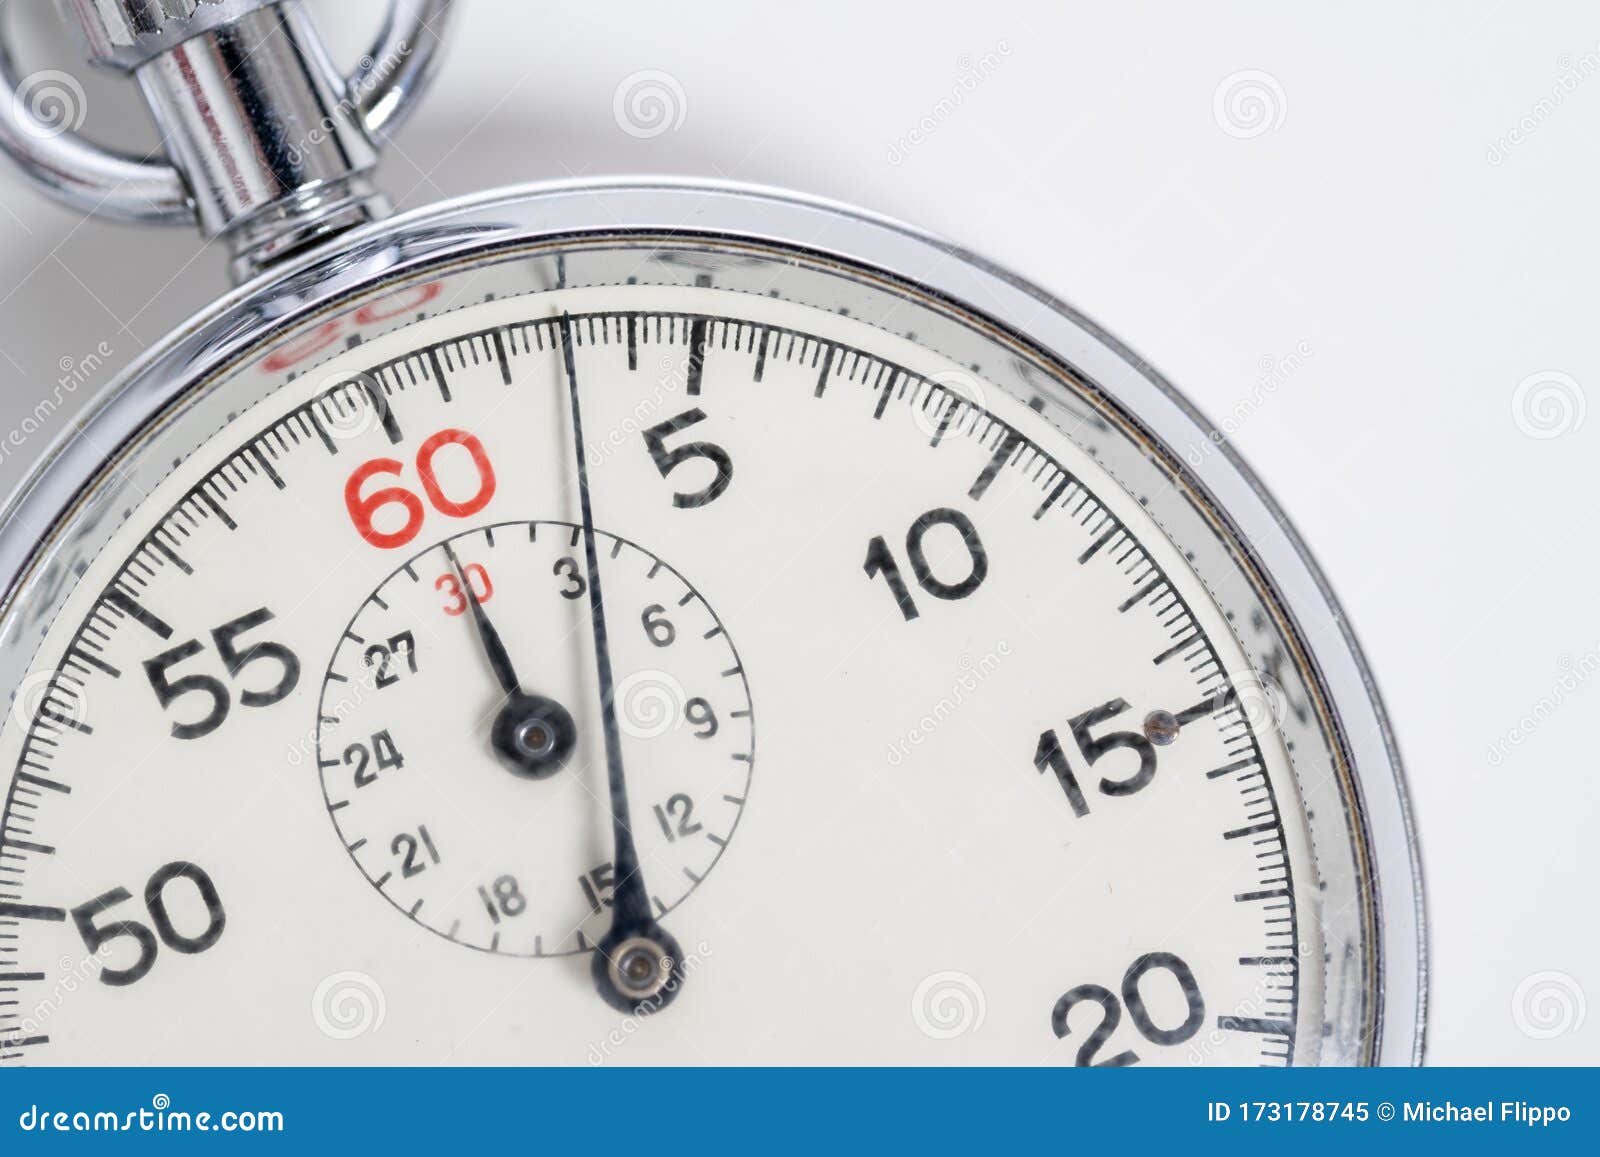 classic 60 second stopwatch on white background